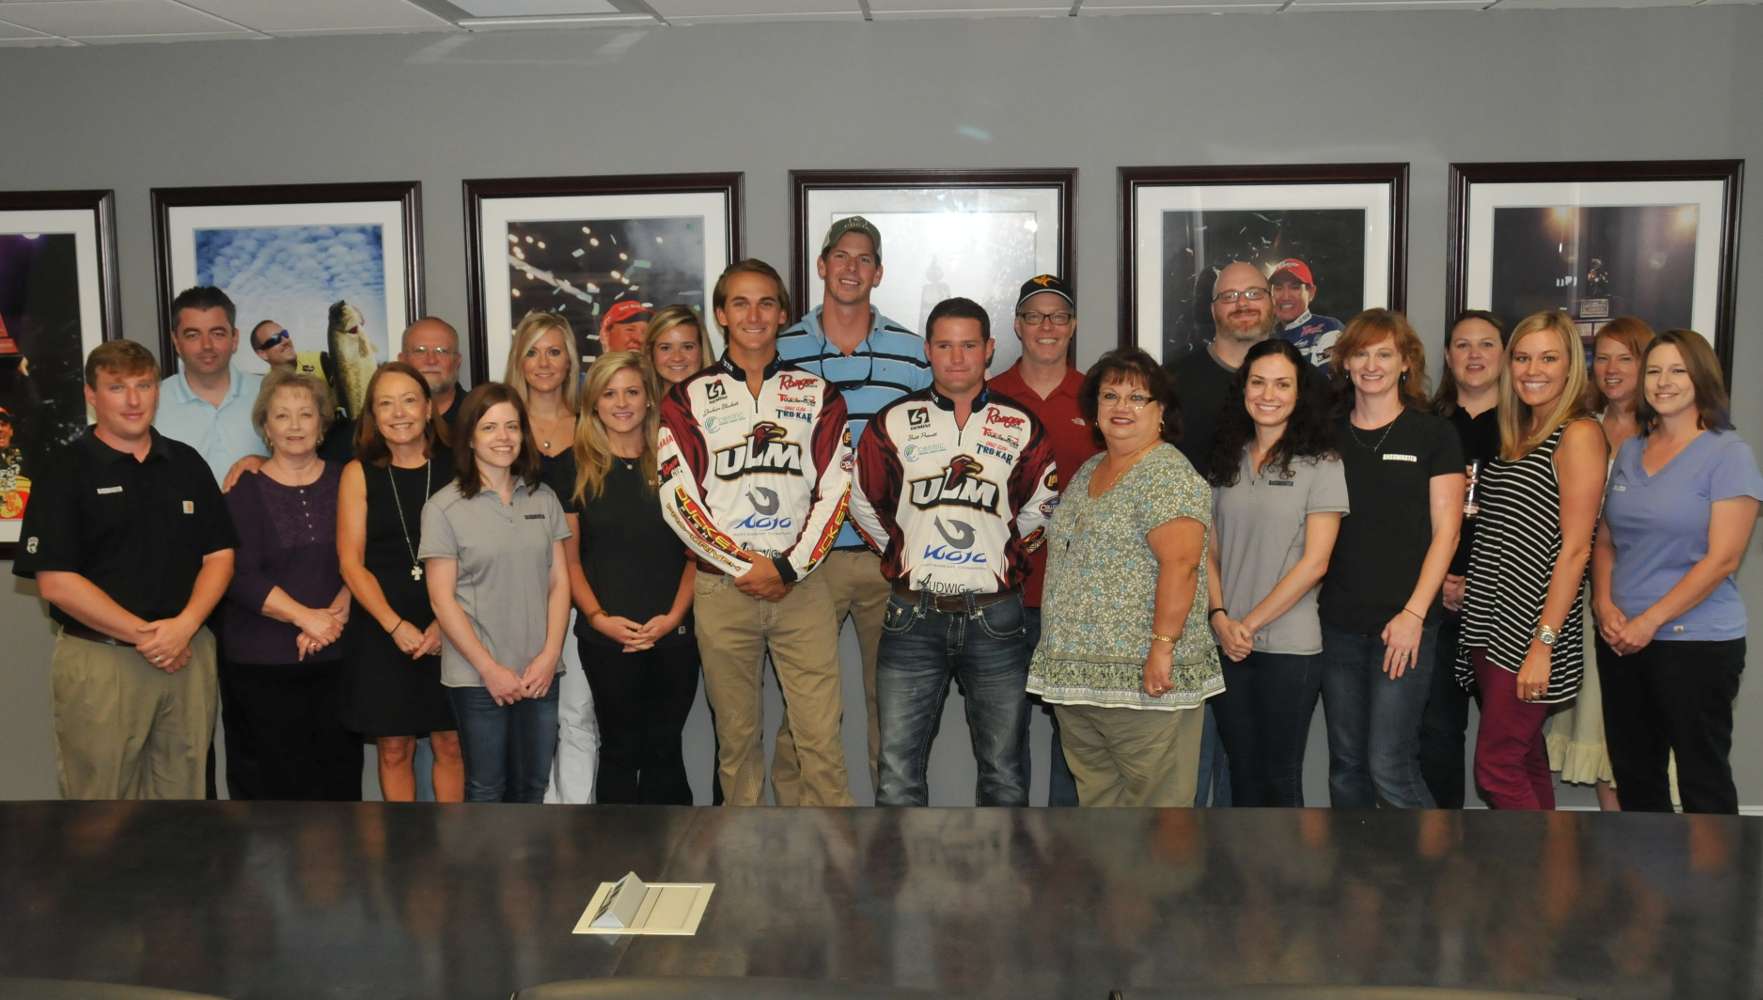 Jackson Blackett and Brett Preuett visited B.A.S.S. headquarters in Birmingham, Ala., only a couple of weeks after the 2014 Carhartt Bassmaster College Series National Championship and Classic Bracket, where they met B.A.S.S. staff.